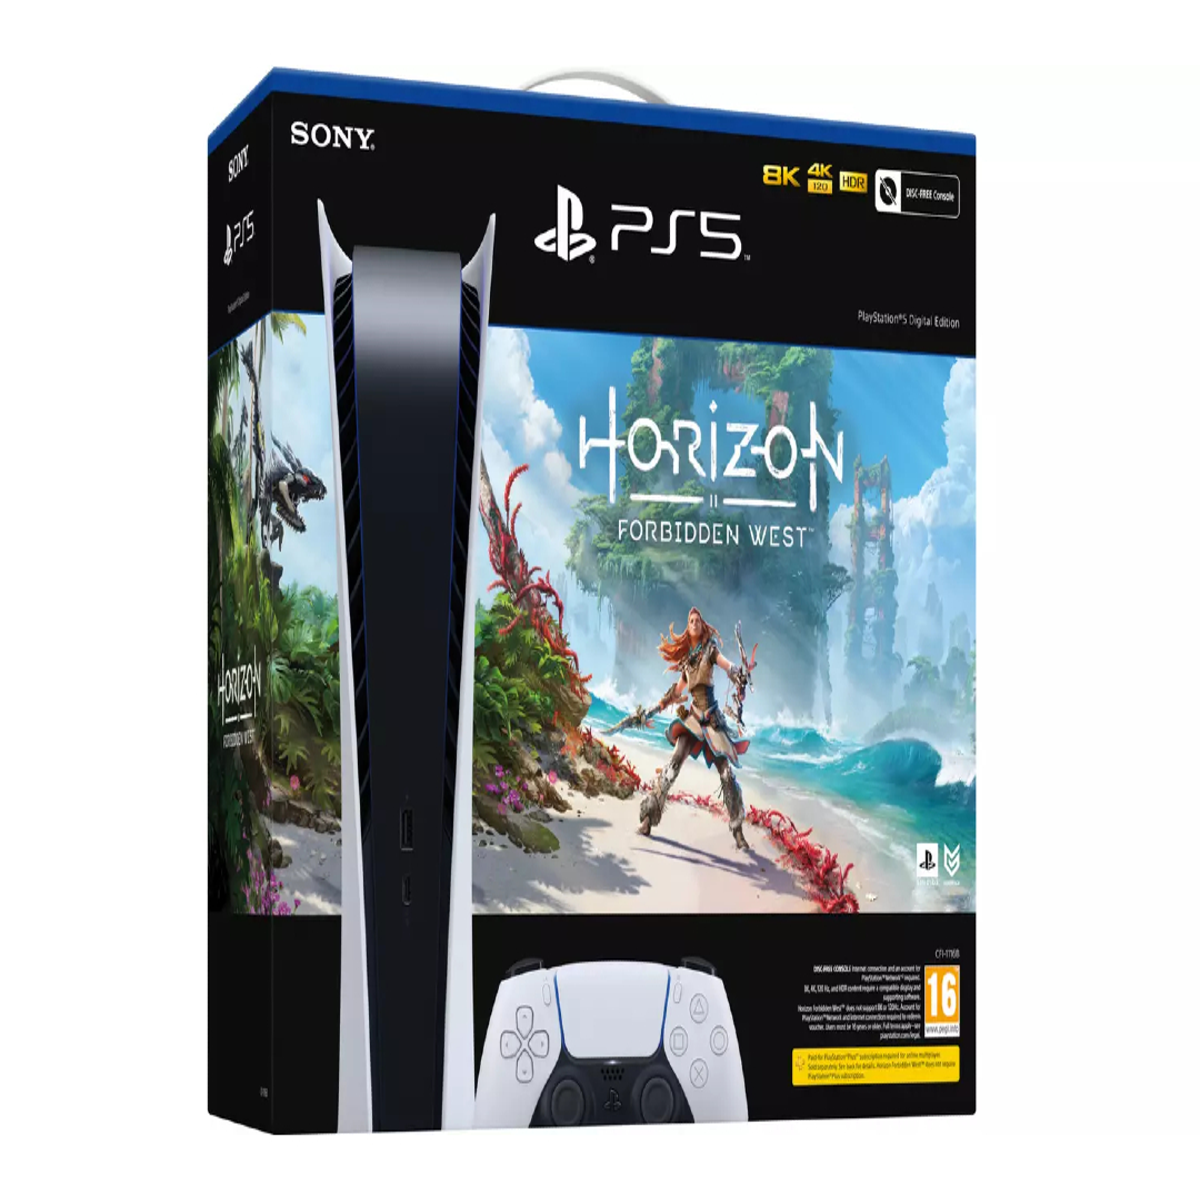 Is Horizon Forbidden West Coming to PC or Steam Deck?